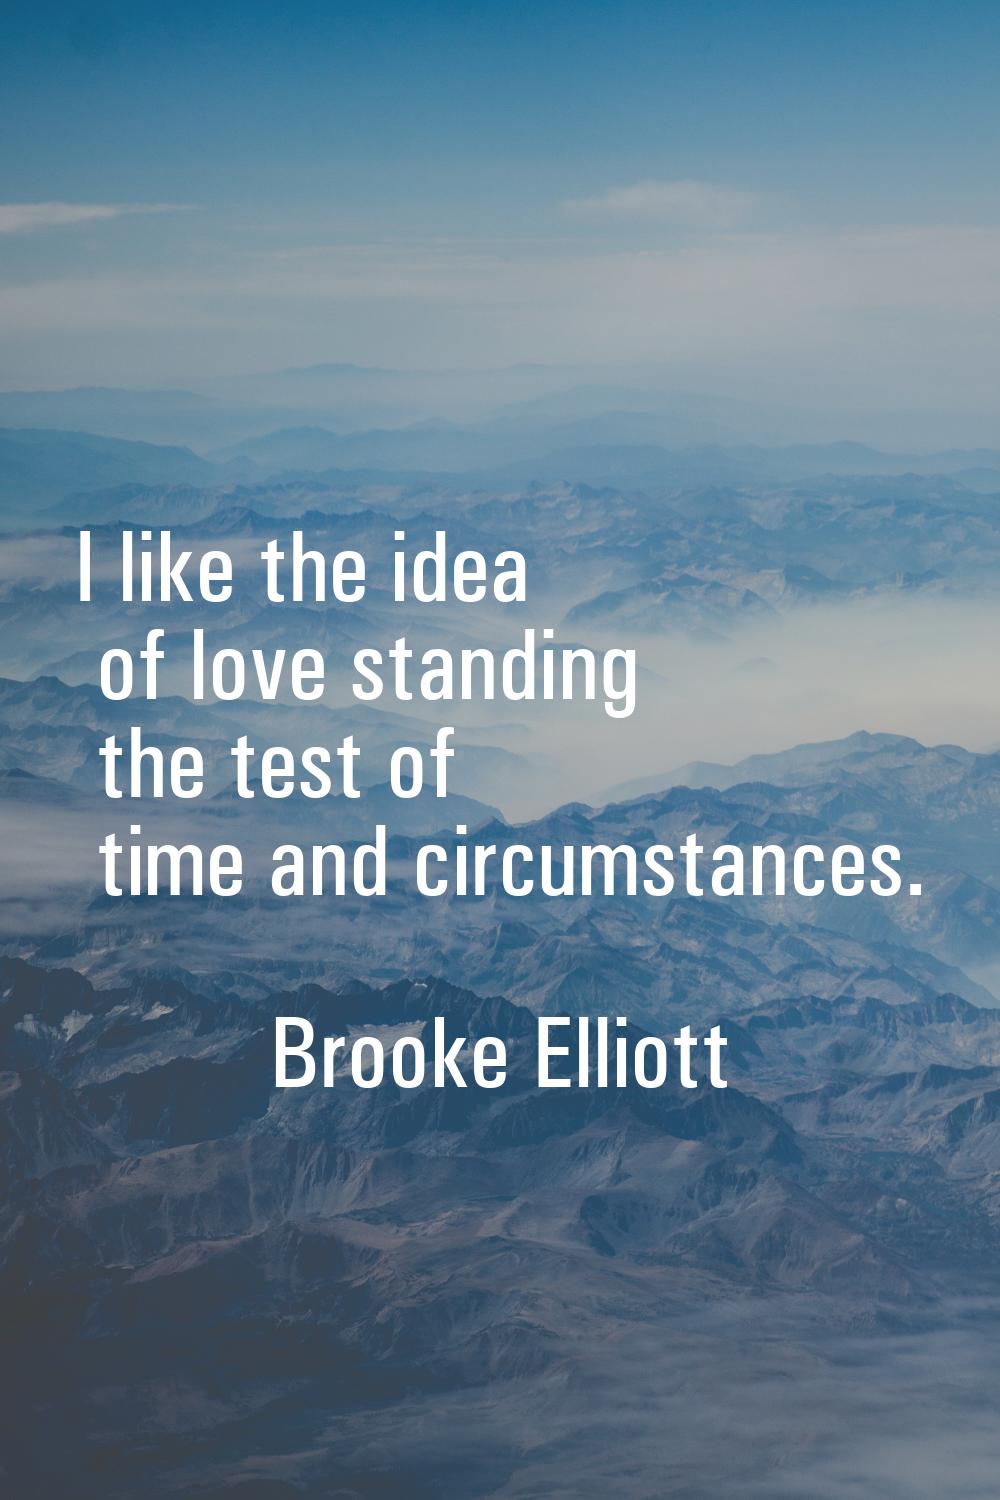 I like the idea of love standing the test of time and circumstances.